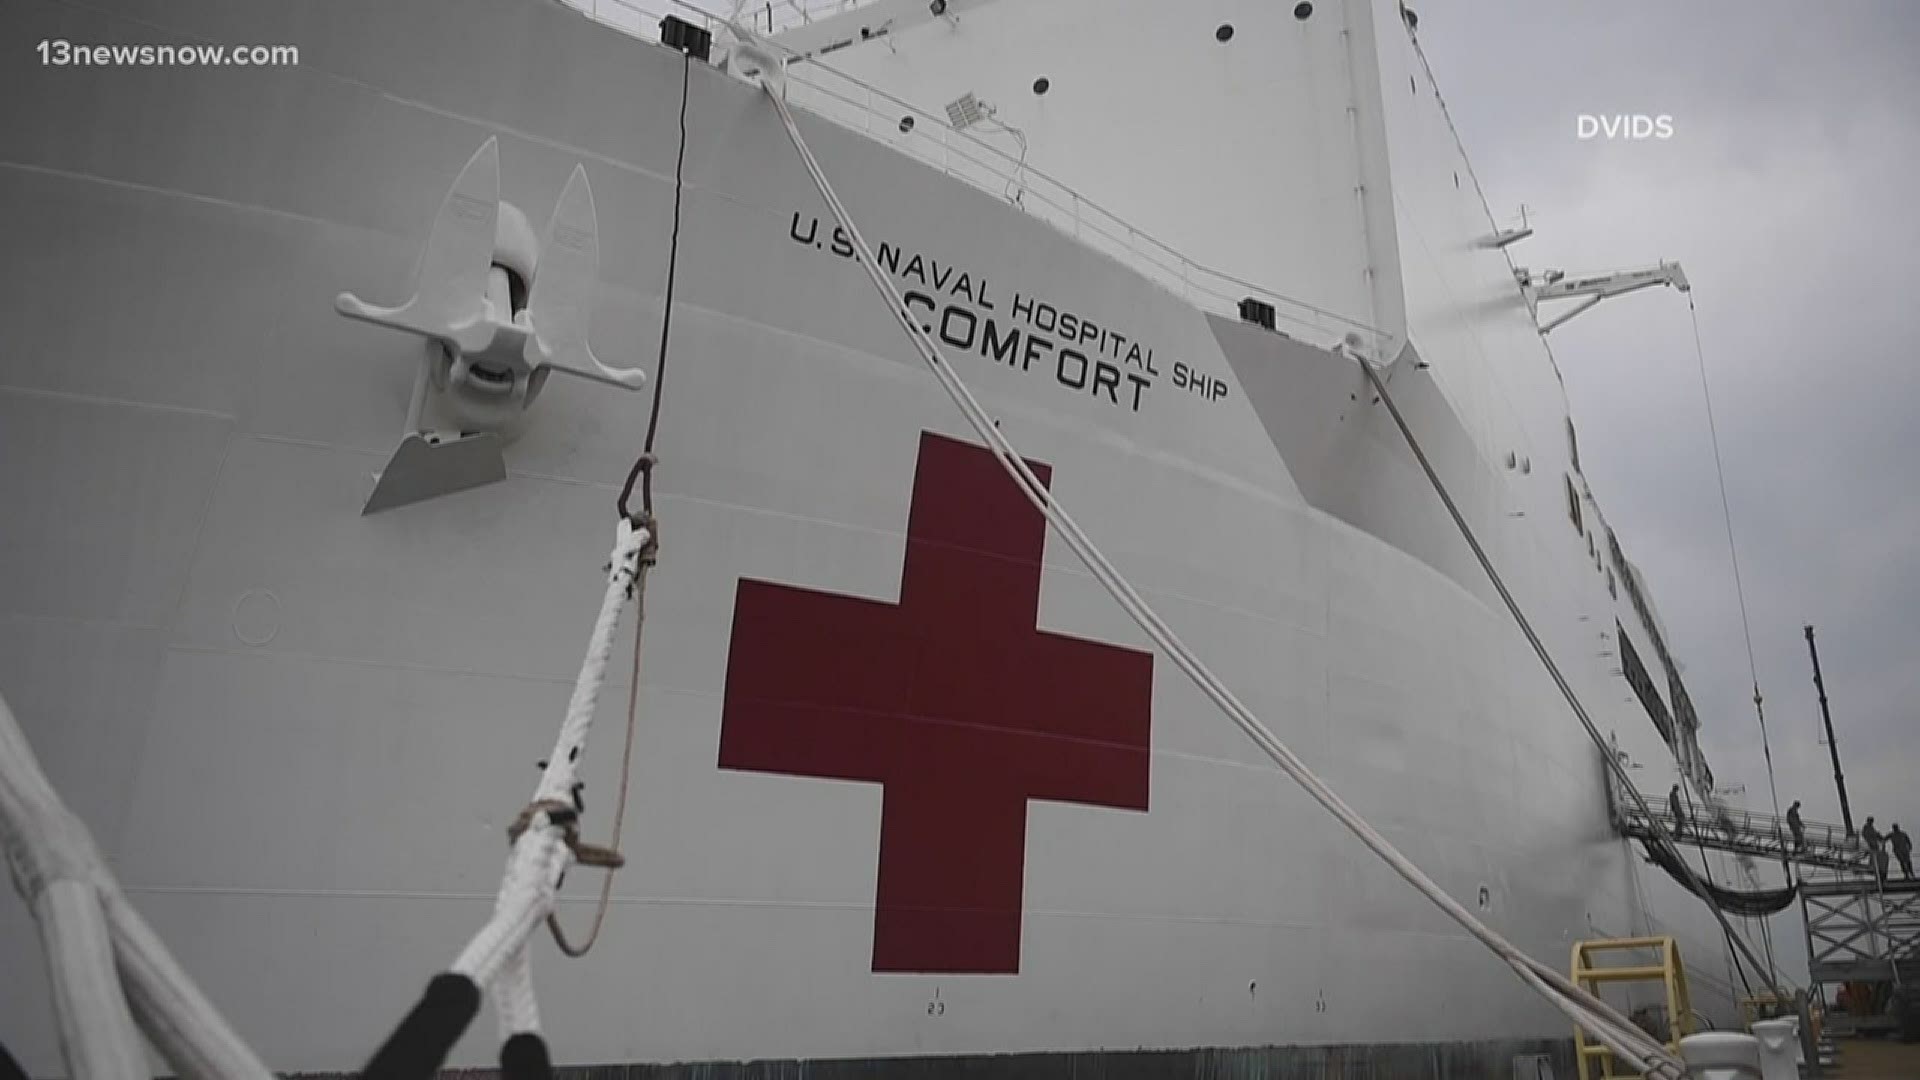 The USNS Comfort sailed to New York to alleviate non-coronavirus patients from hospitals there. After an order from the president, now they treat COVID-19, too.